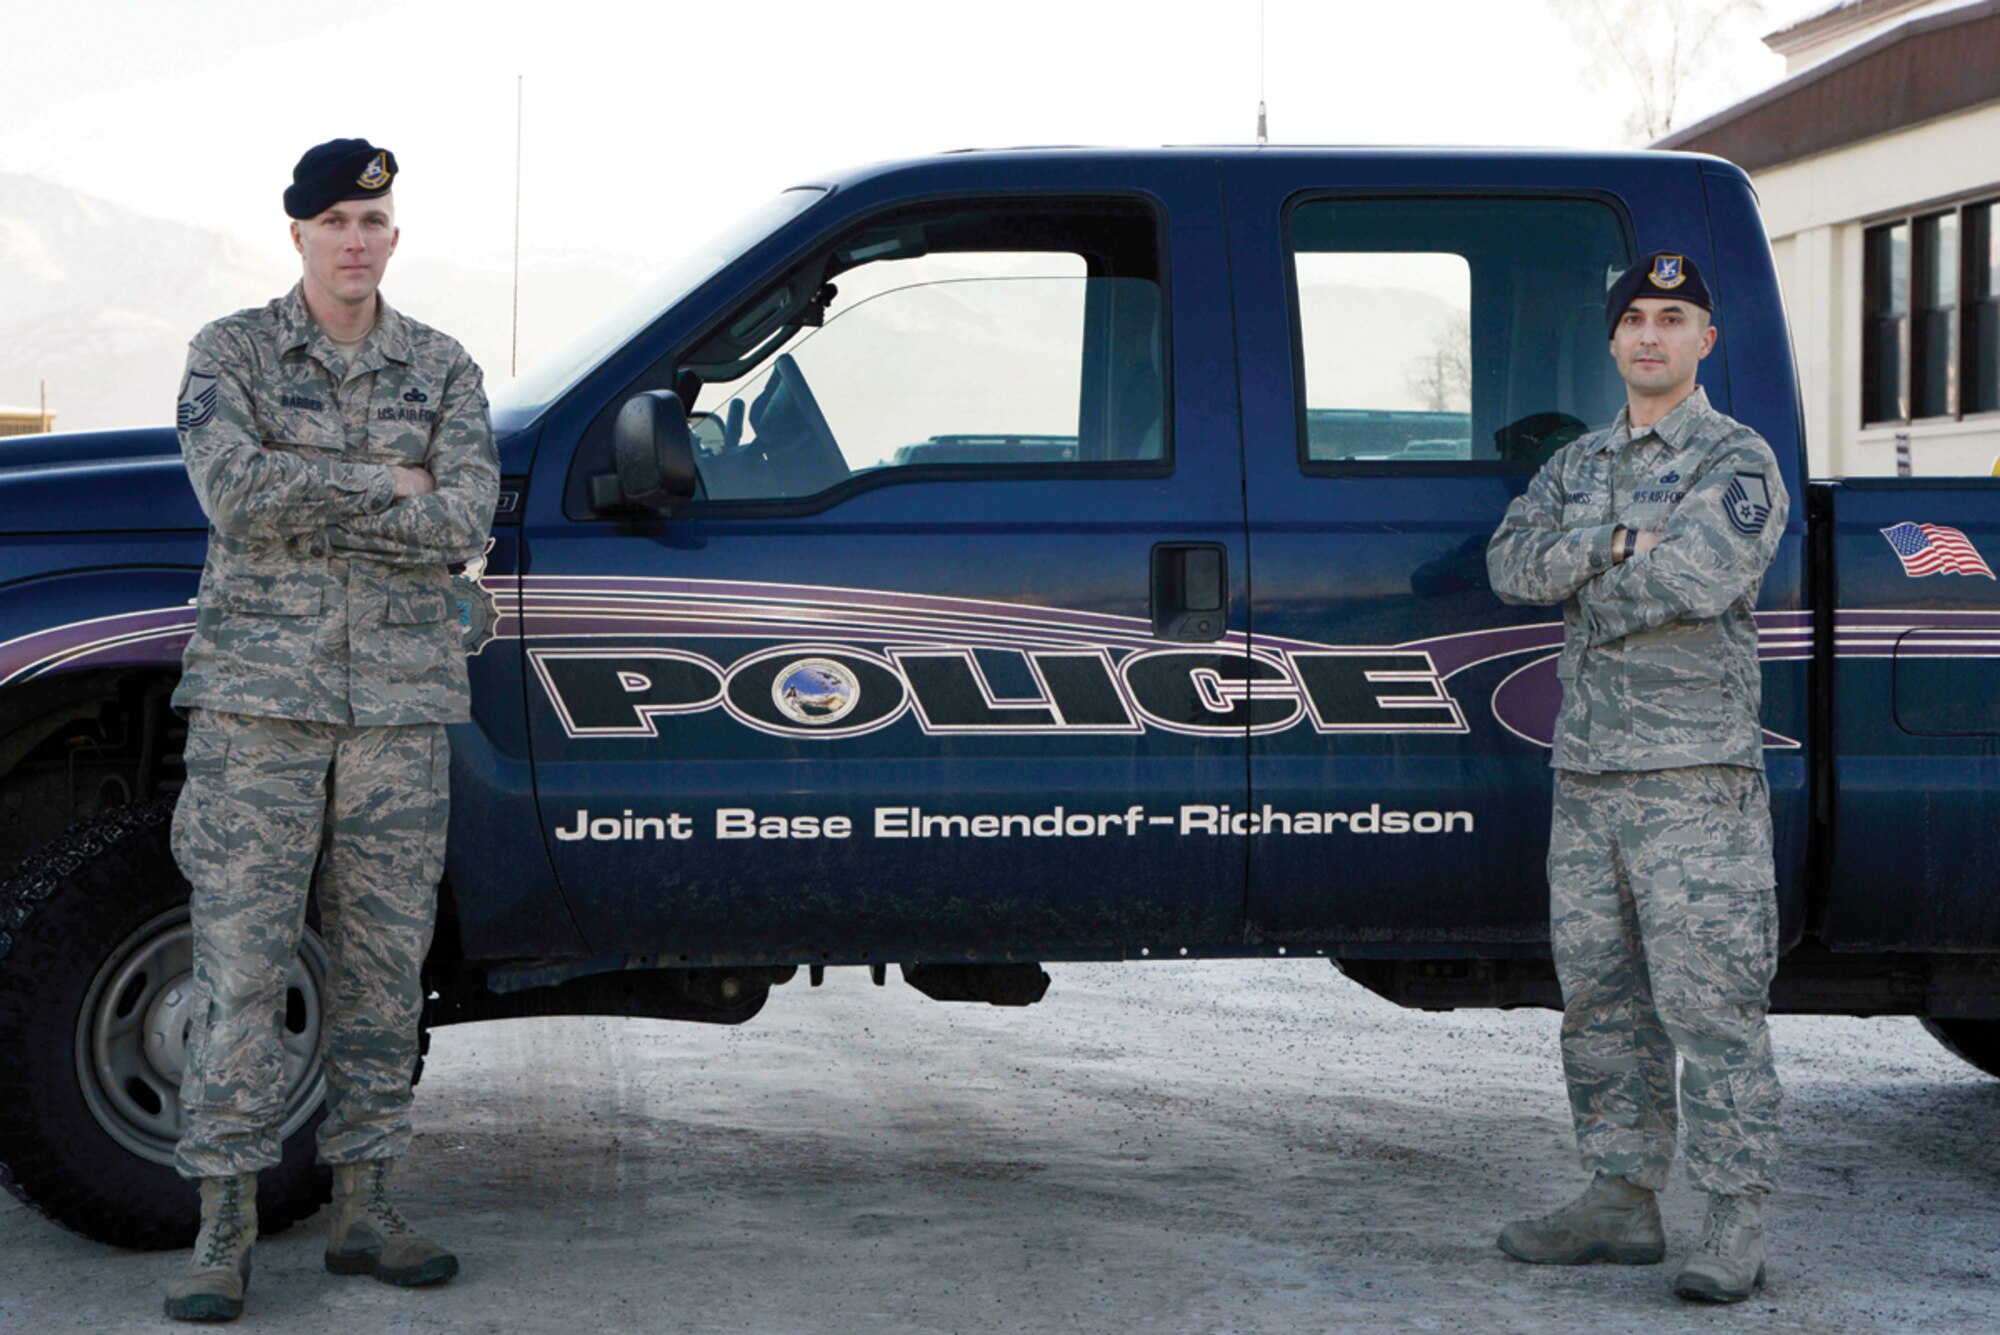 (Left to right) Master sergeants David Barber and Morgan Cabaniss, 673 Security Forces Squadron, pose for the camera on Joint Base Elmendorf-Richardson, Alaska, Nov. 18, 2013. Barber and Cabaniss rescued a wrecked trucker 100 miles north of Arctic Circle braving -35 degree windchill and subzero temperature. (U.S. Air Force photo/Staff Sgt. Sheila deVera)
